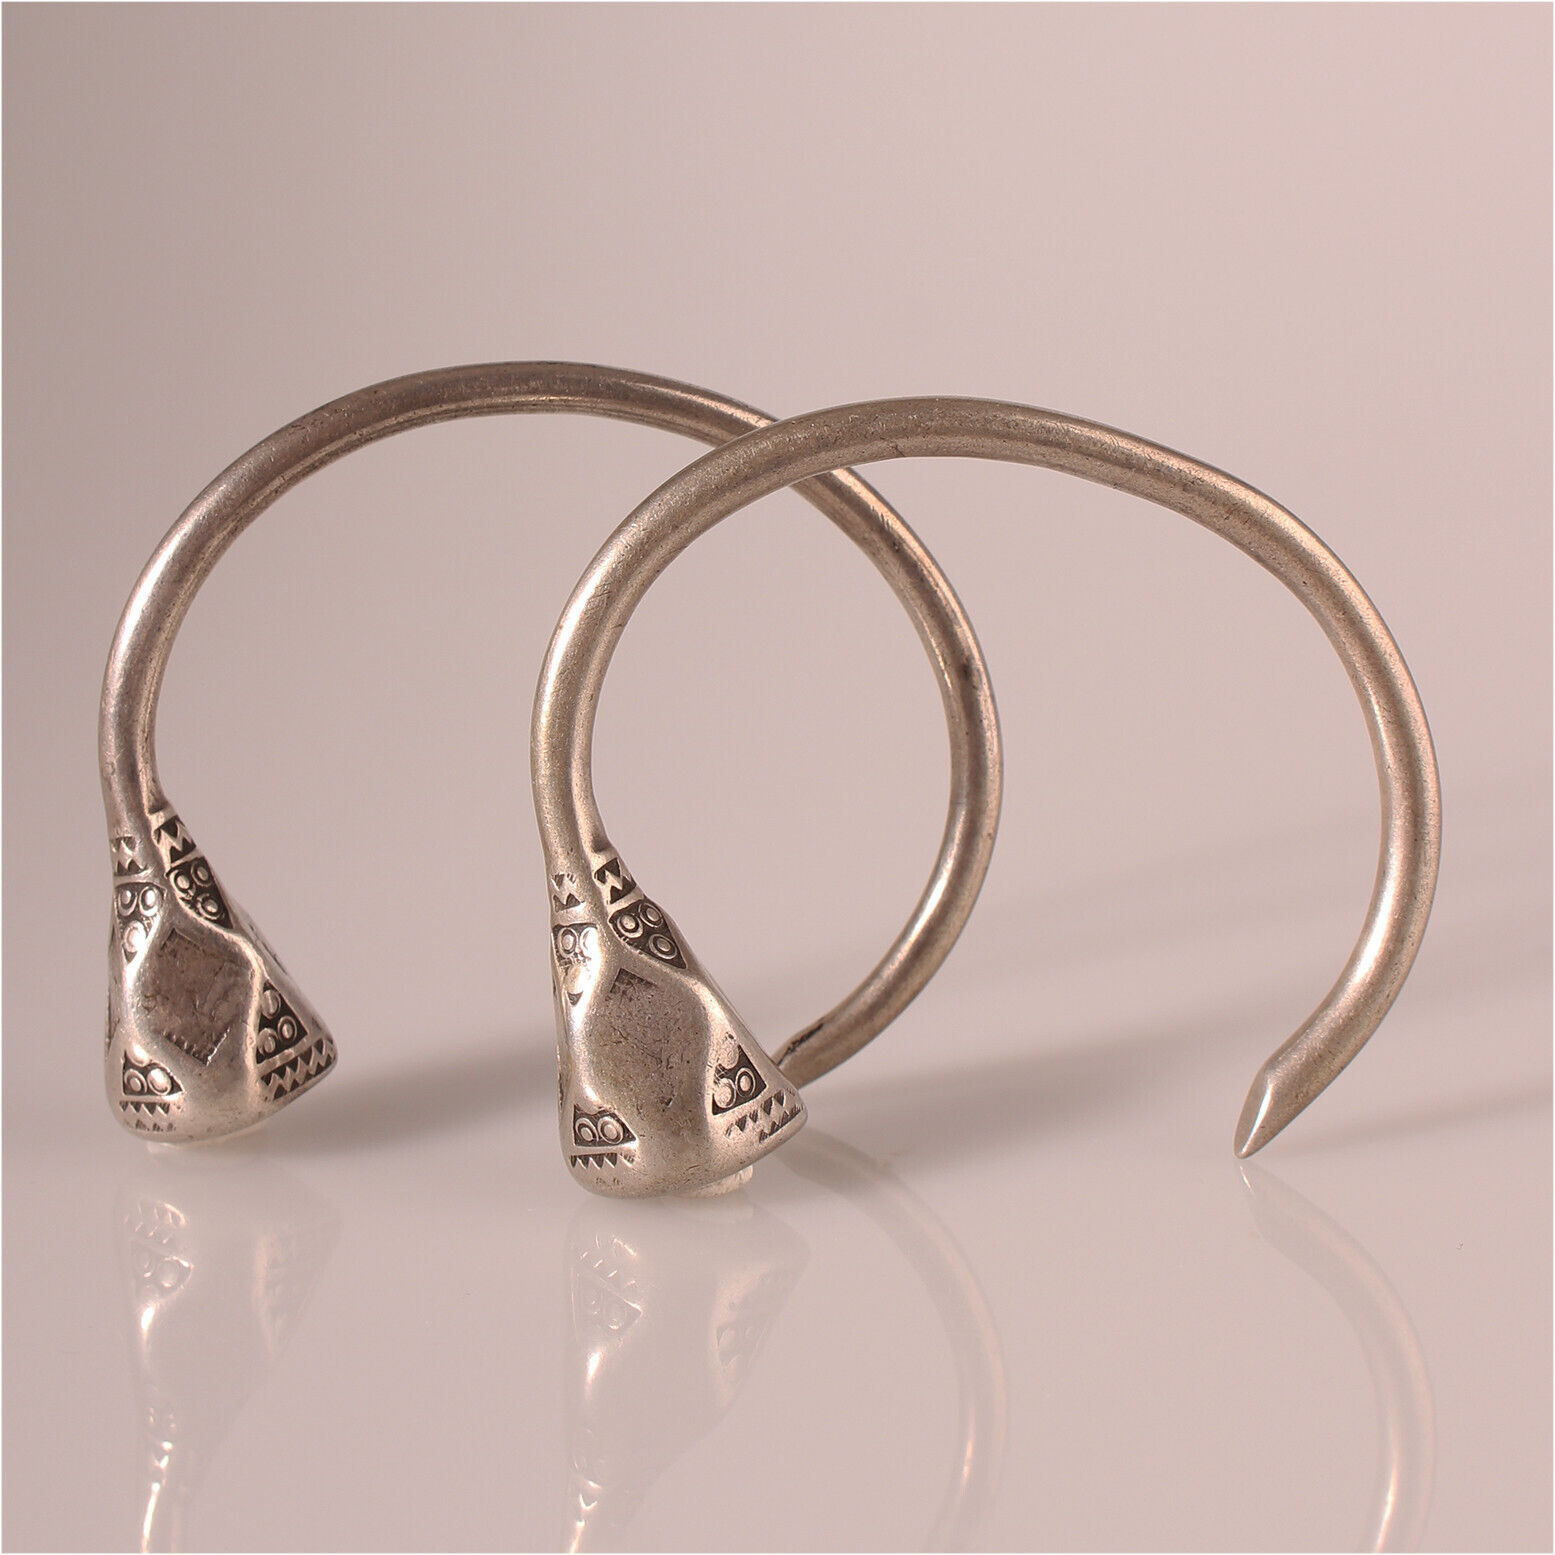 12952 Old Tuareg Earring Silver Solid Agadez Niger